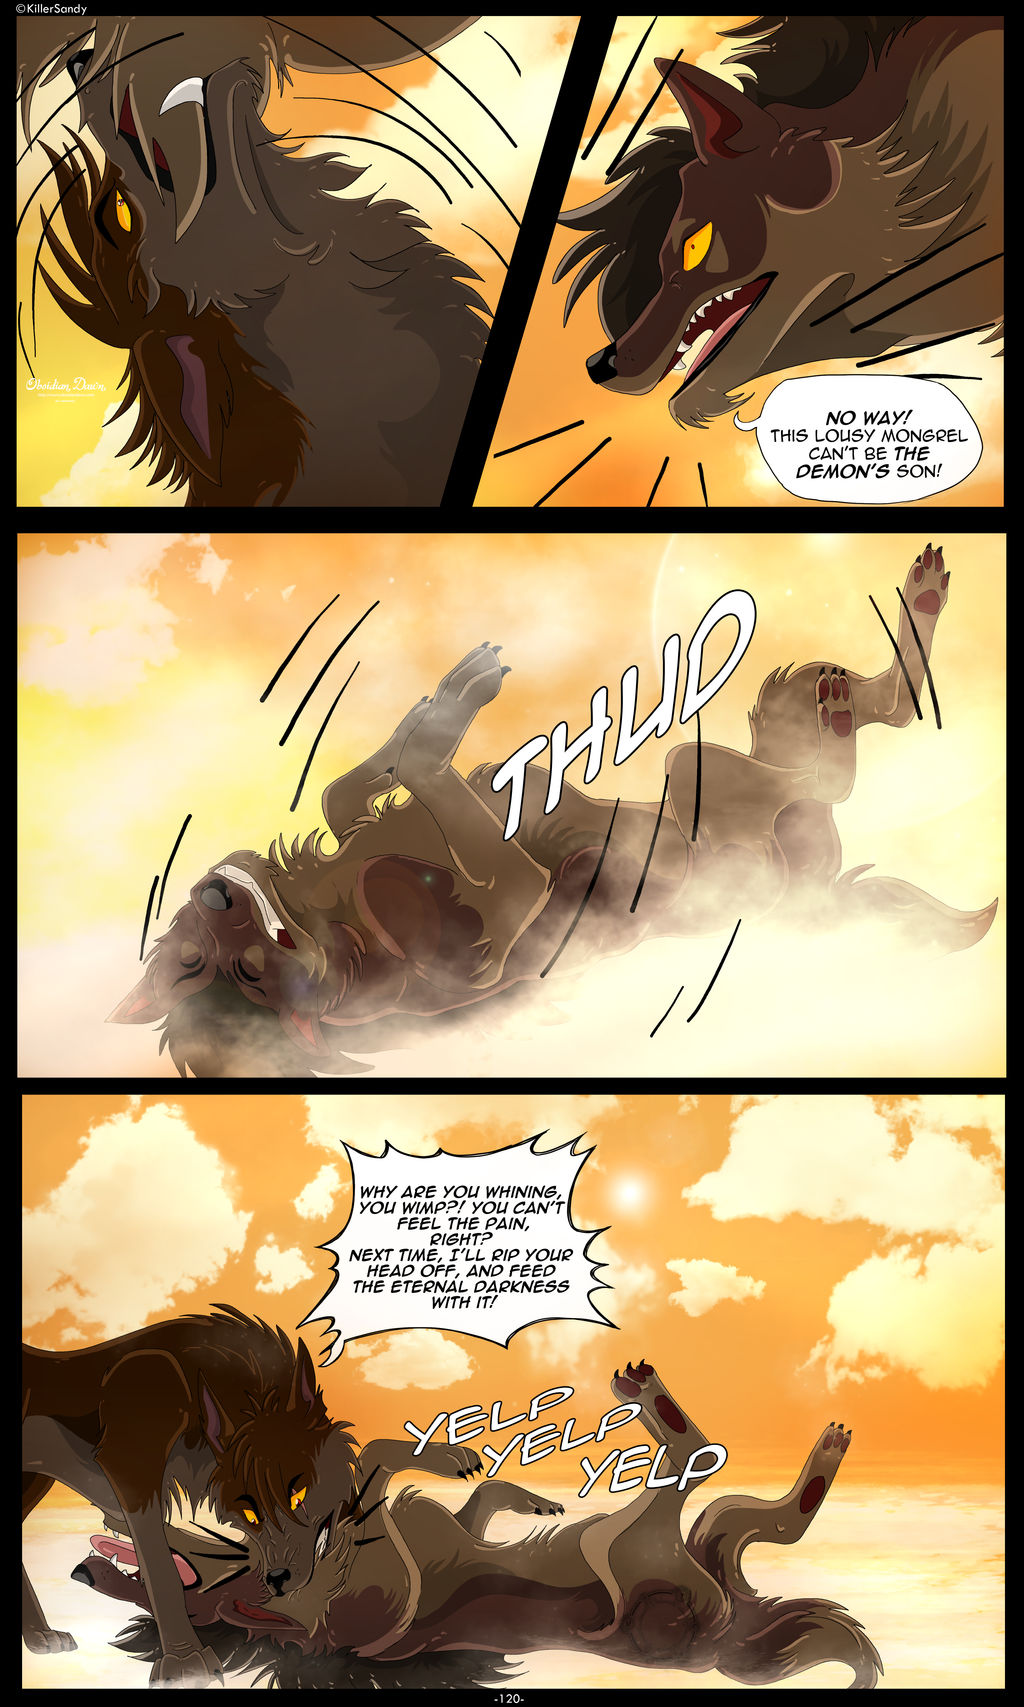 The Prince of the Moonlight Stone page 120